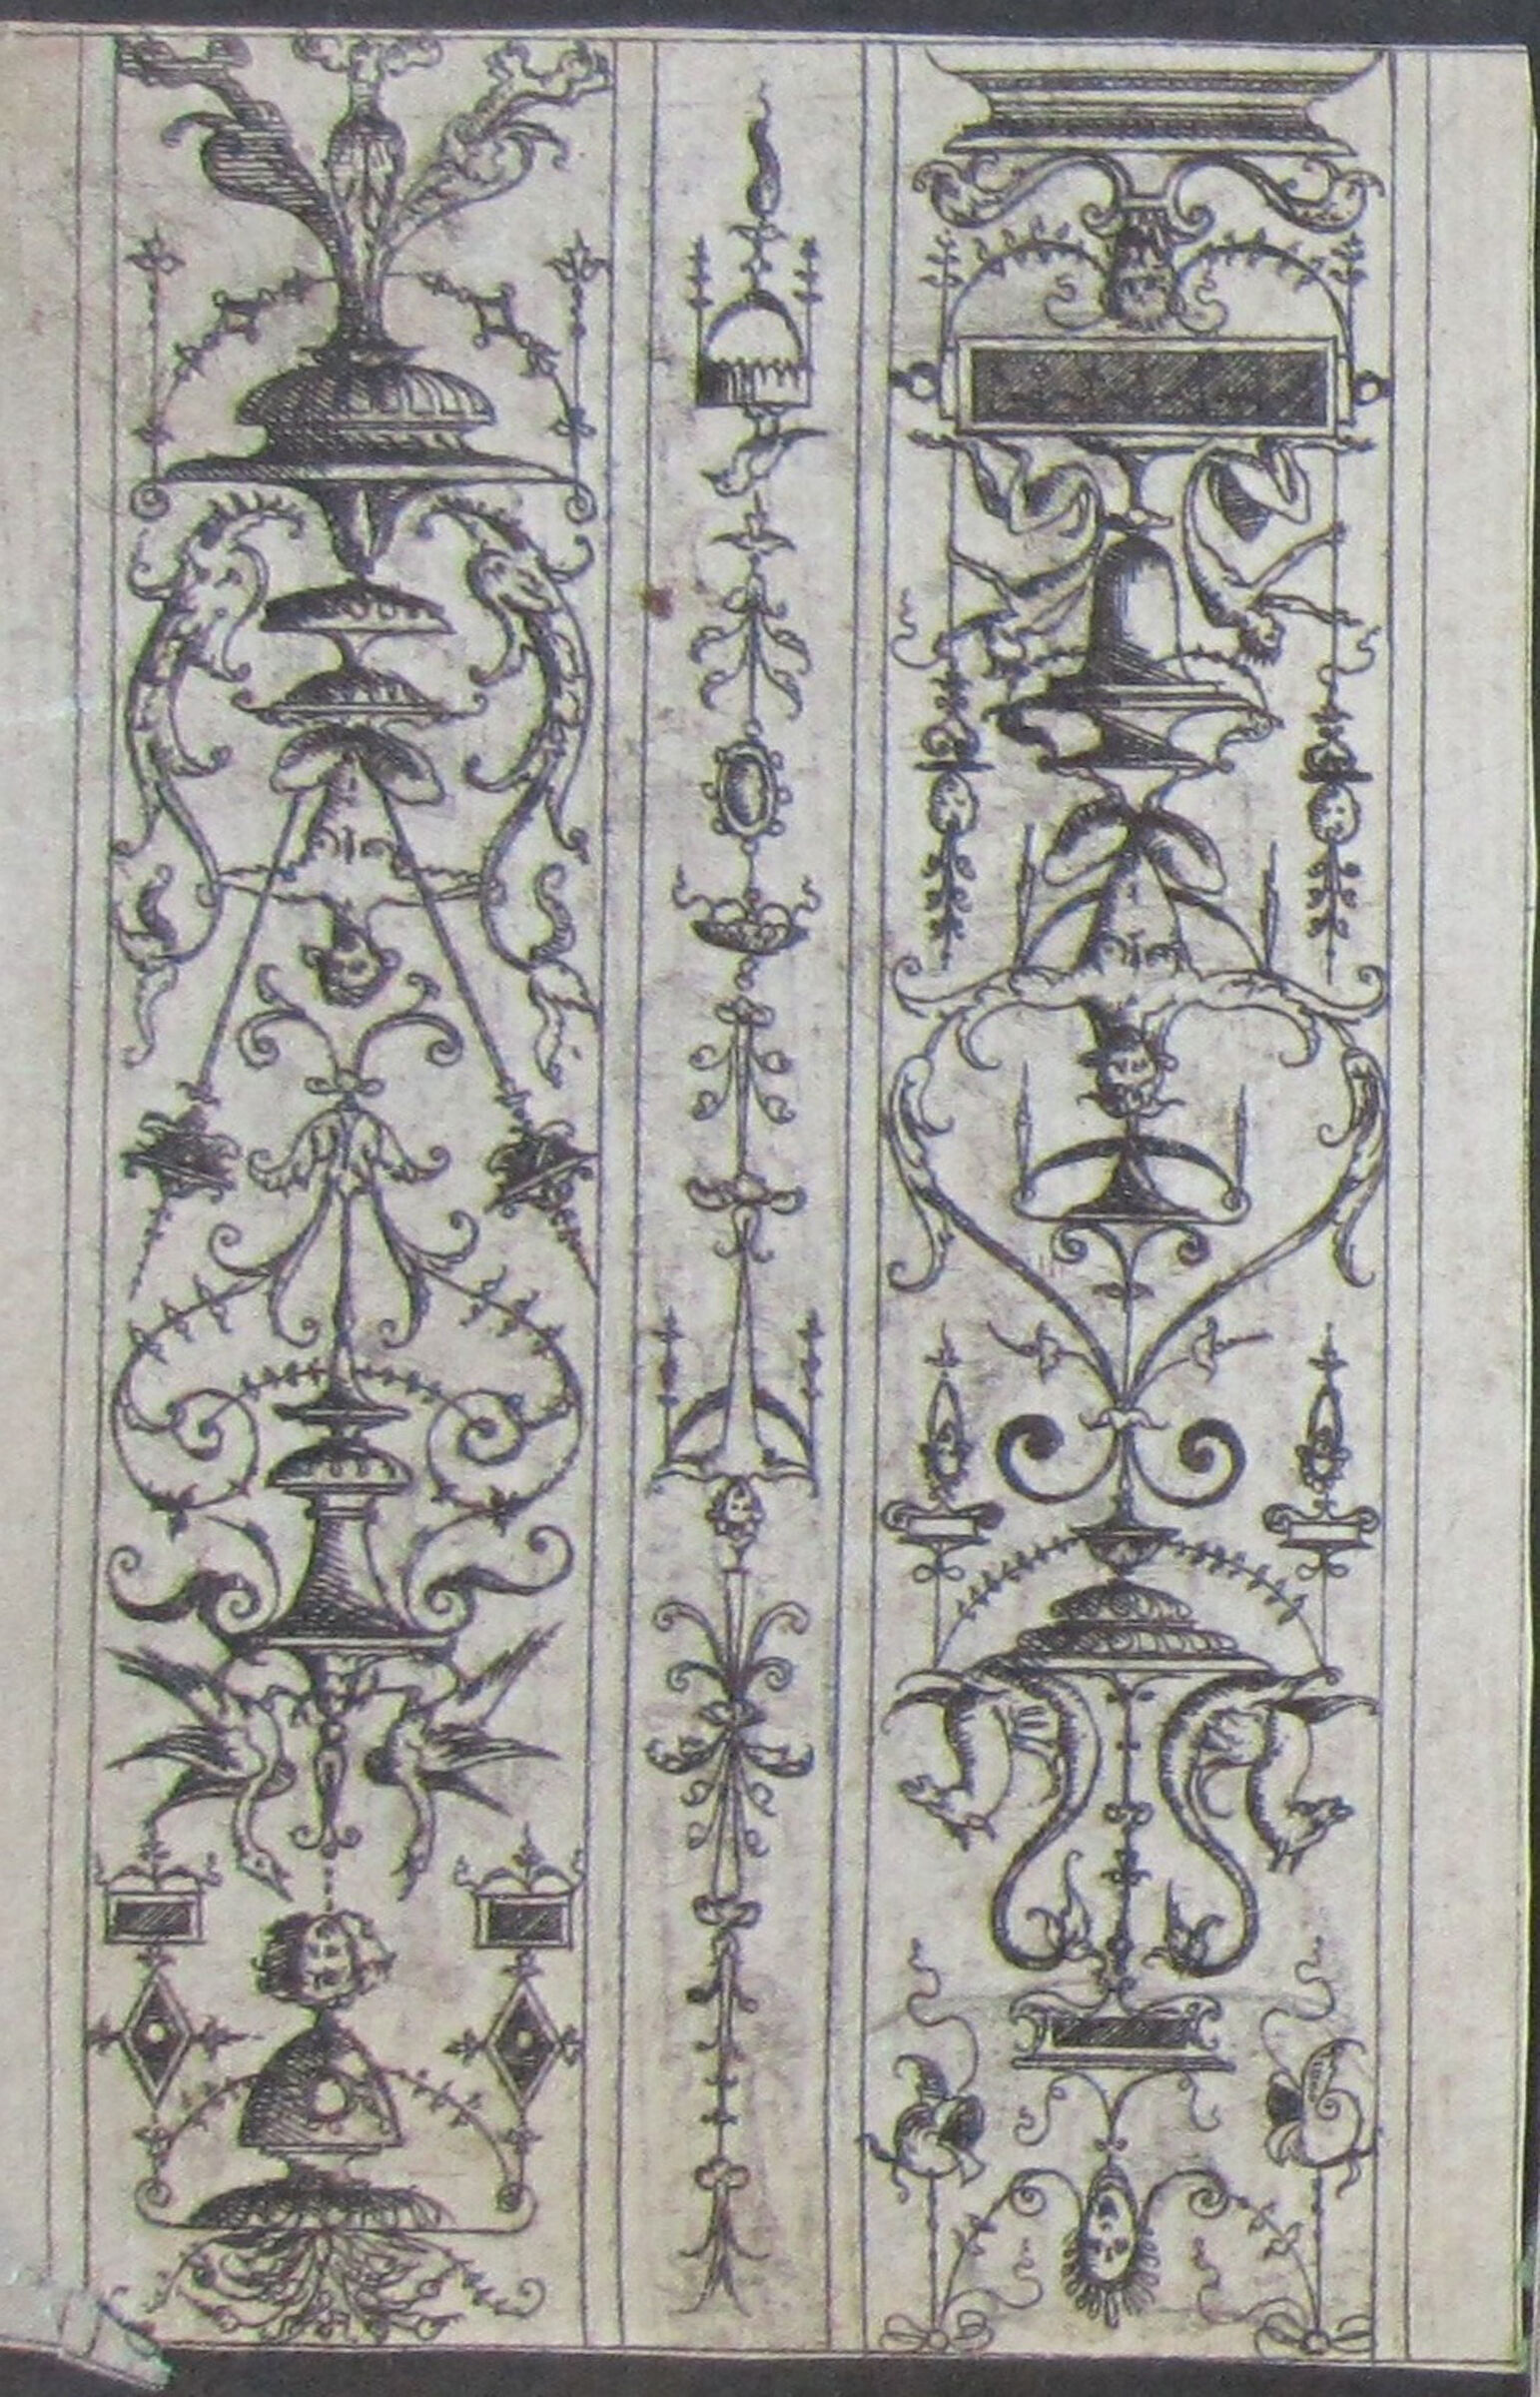 Two Grotesques Separated By A Band Of Ornament, Each Grotesque With A Figure Squatting On A Tiered Vase